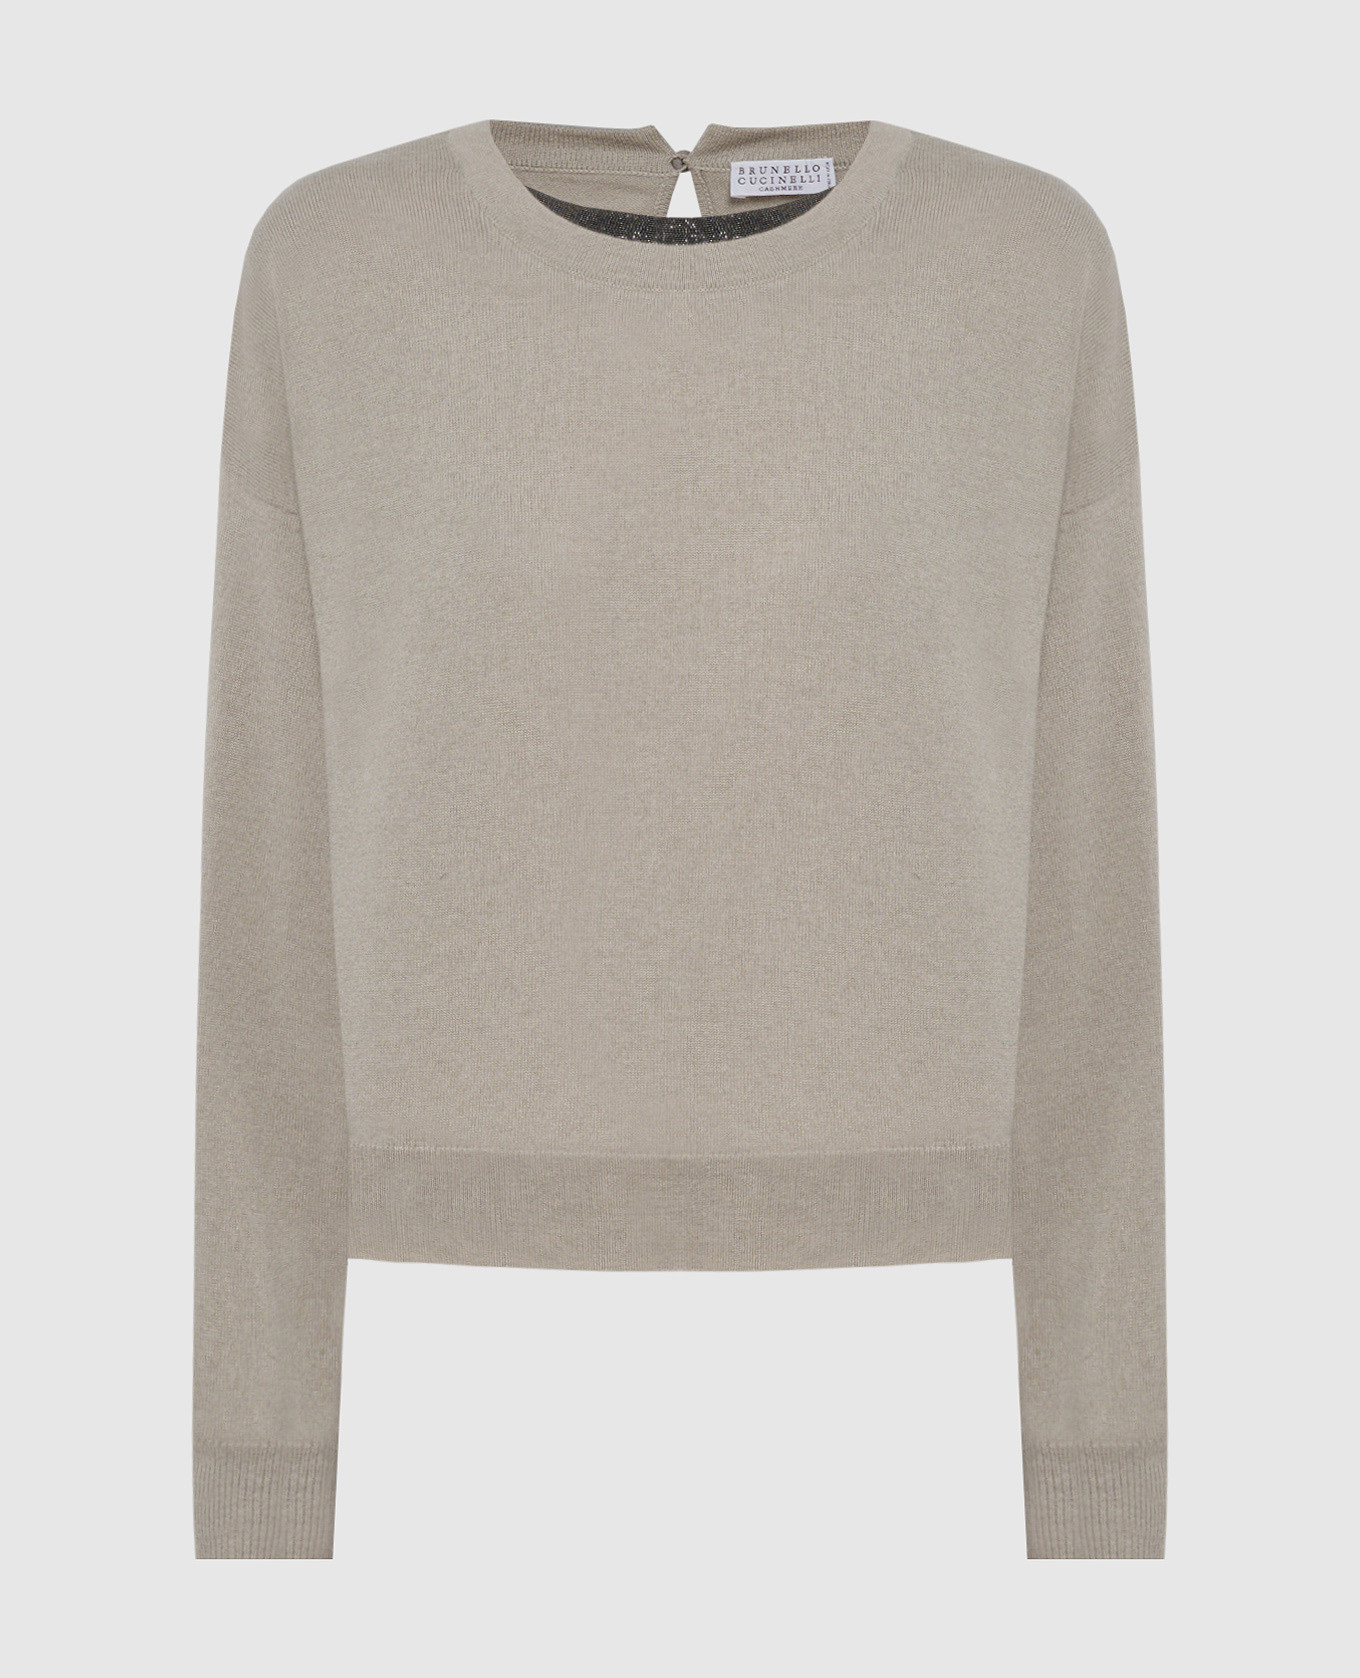 Gray cashmere sweater with monil chain